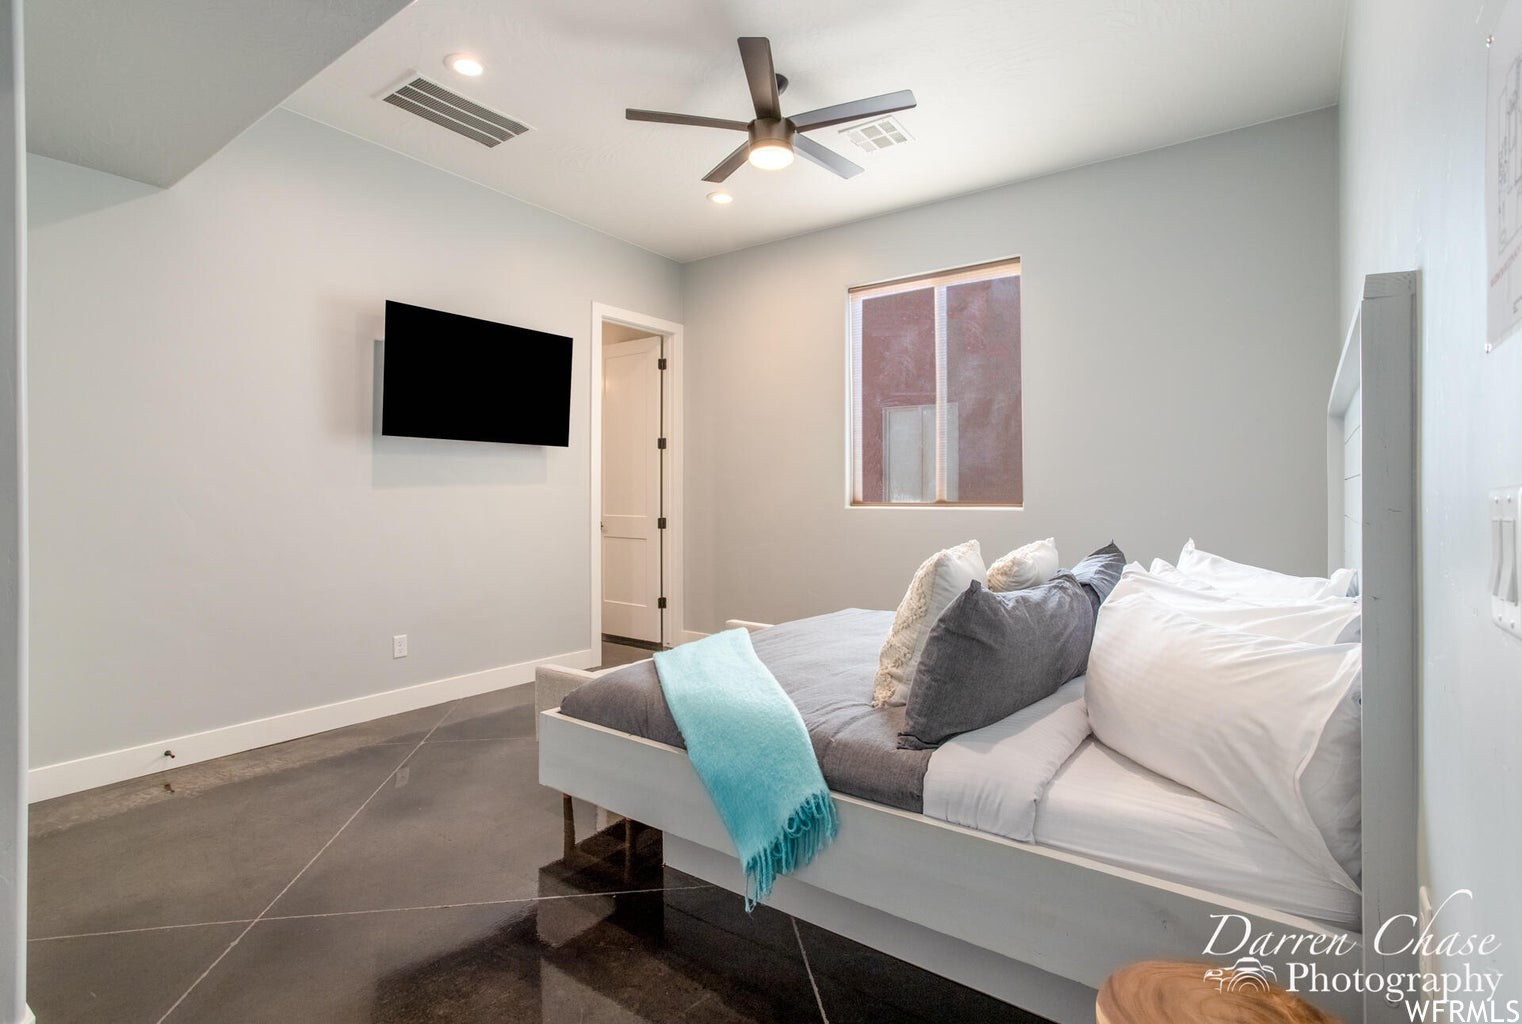 Tiled bedroom with a ceiling fan and TV